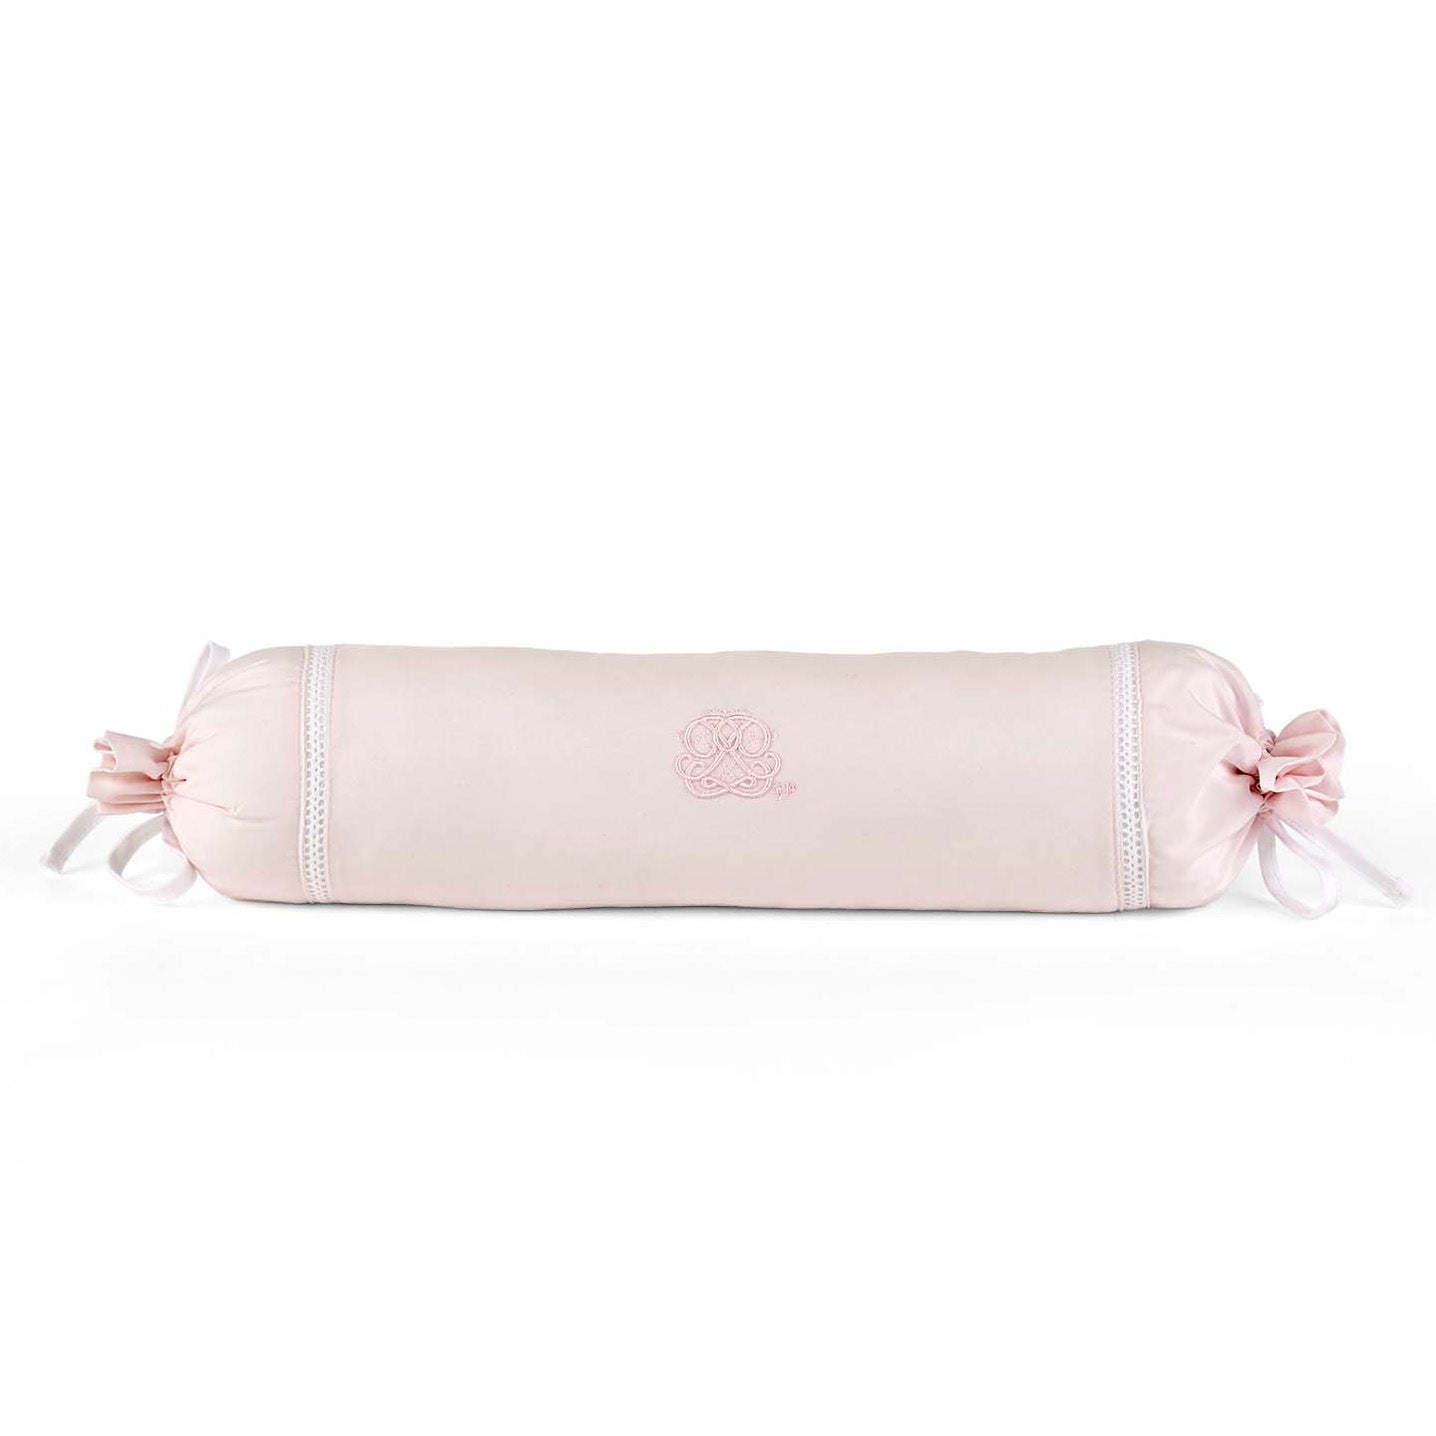 Theophile & Patachou Baby Roll Cushion - Cotton Pink